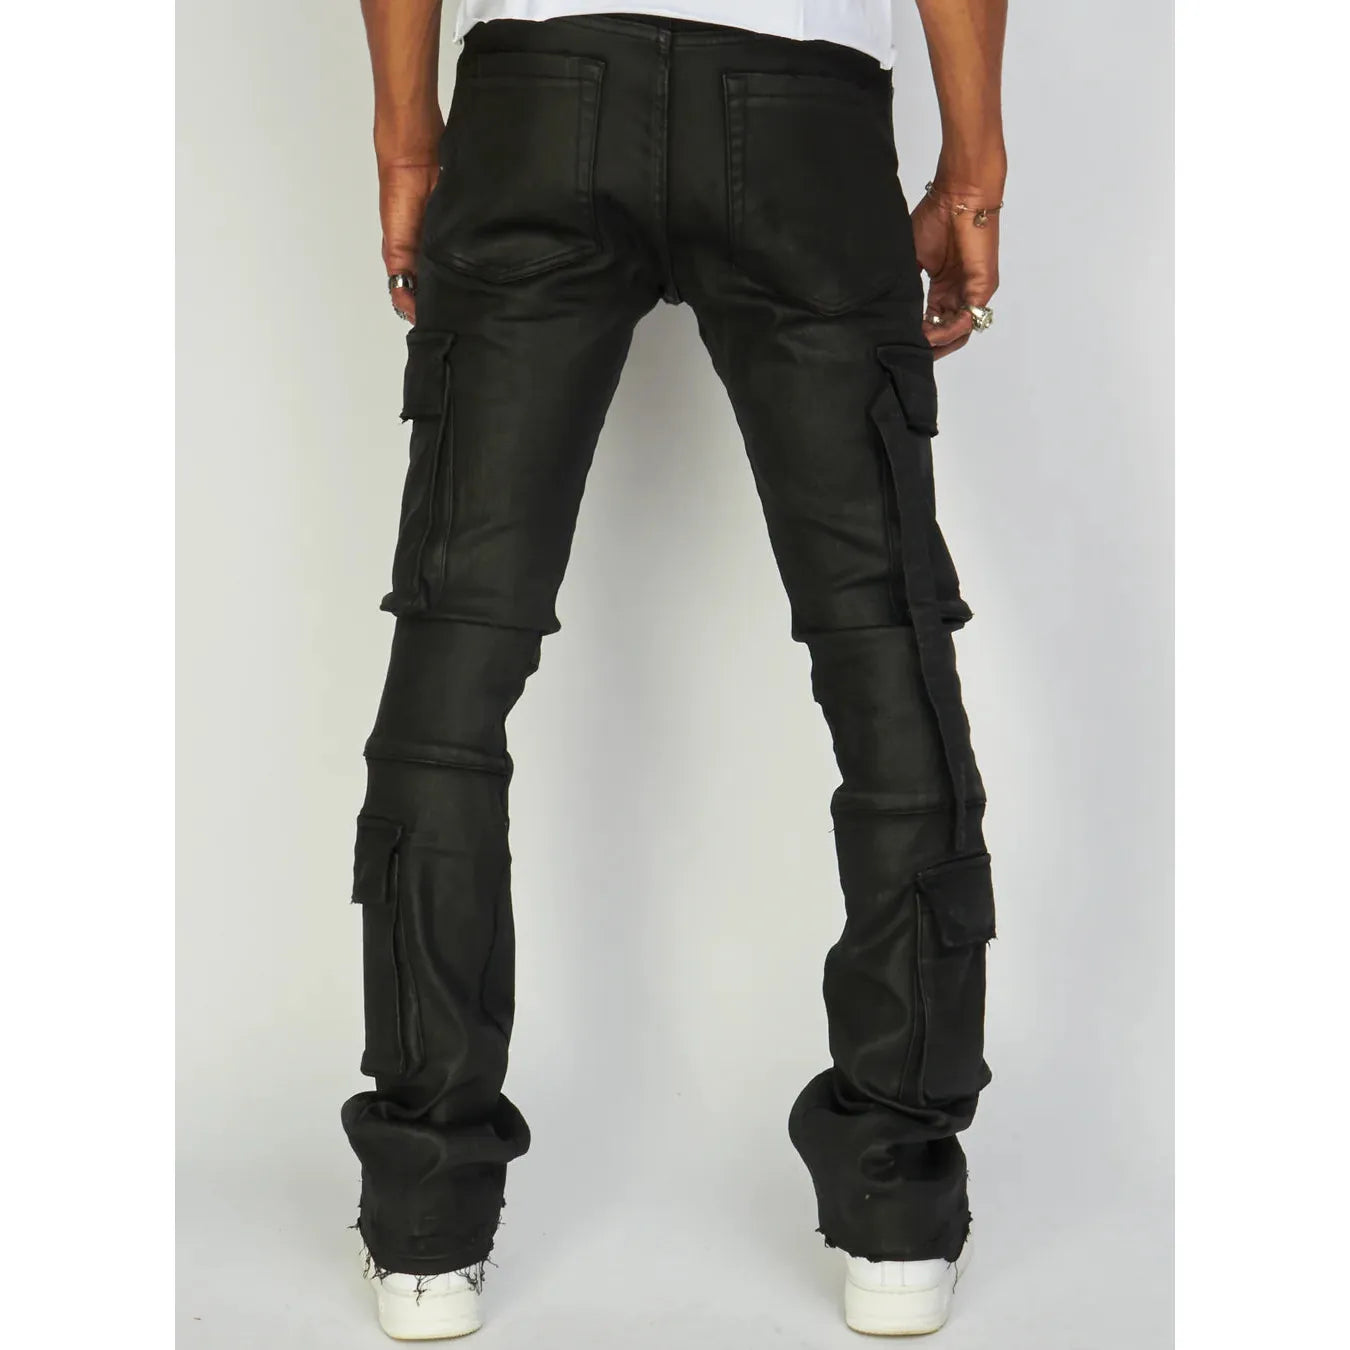 PLTKS Stacked Cargo Flare Black Wax Jeans (Otto506)